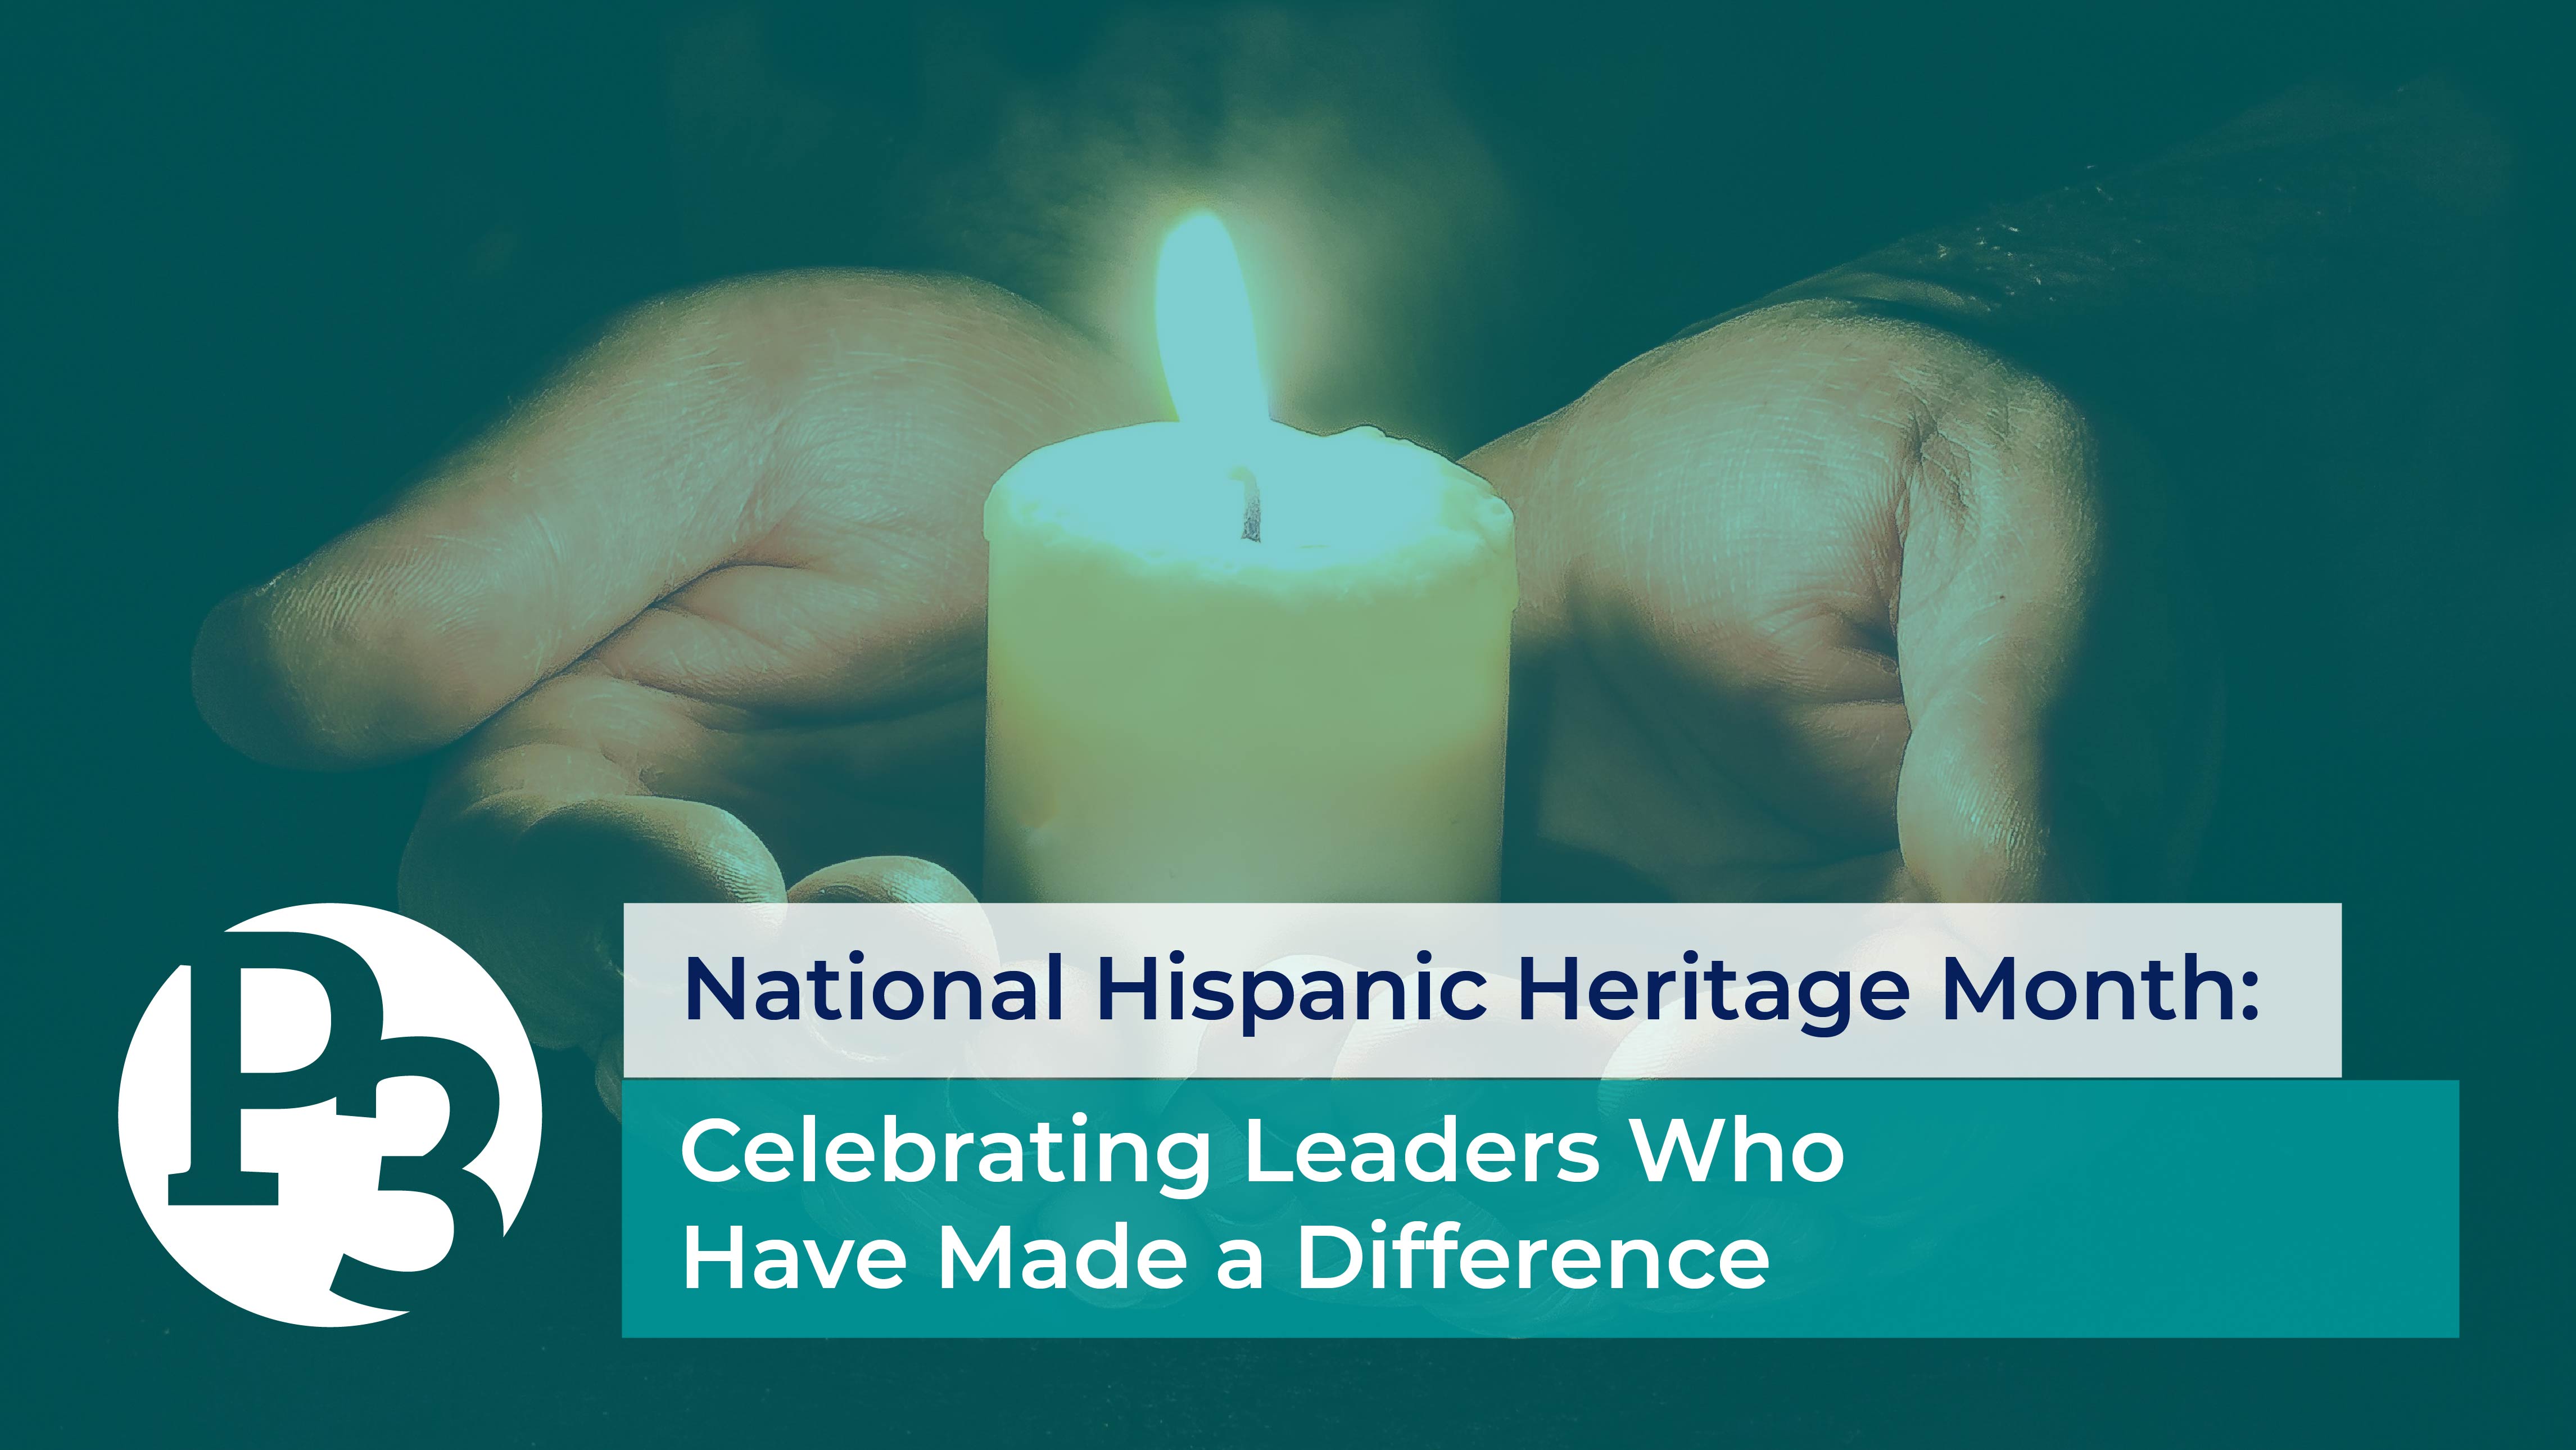 National Hispanic Heritage Month: Celebrating Leaders Who have Made a Difference